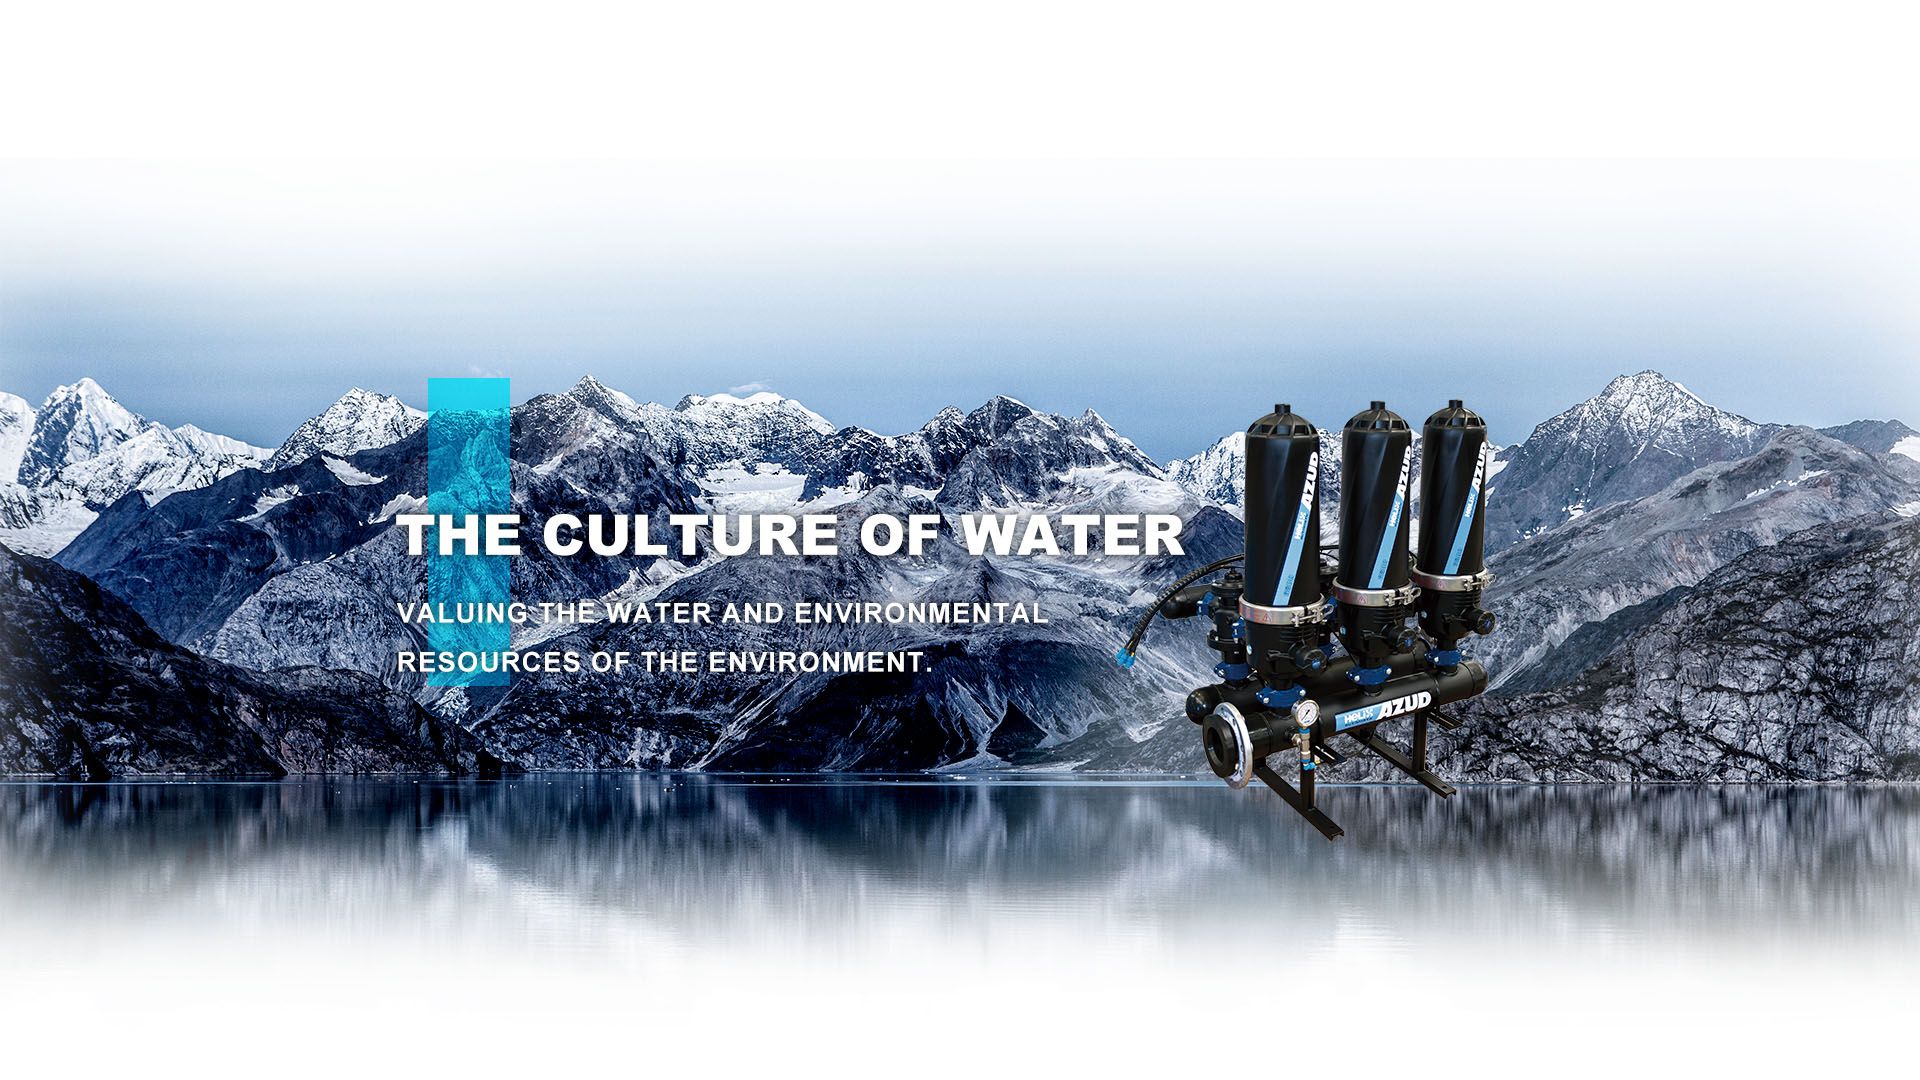 THE CULTURE OF WATER